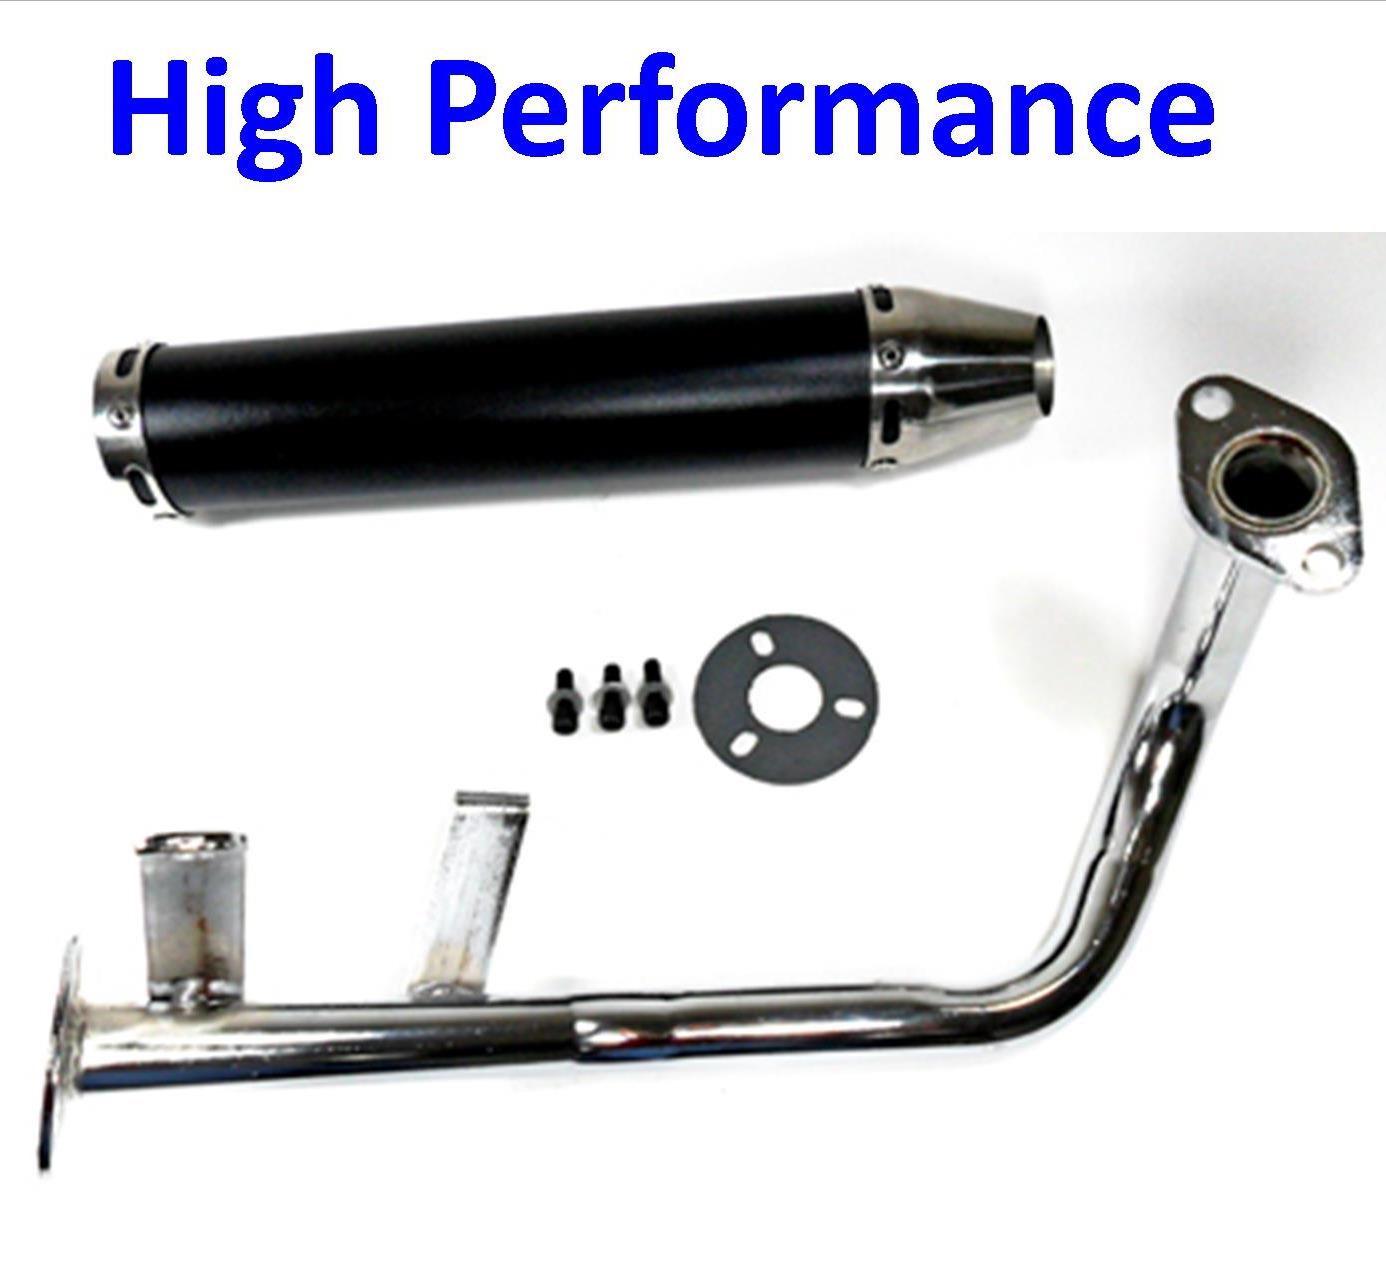 Exhaust Pipe HIGH PERFORMANCE BLACK/CHROME Fits Most GY6-50 QMB139 49cc Chinese Scooter Motors Canister L=280mm D=60mm - Click Image to Close